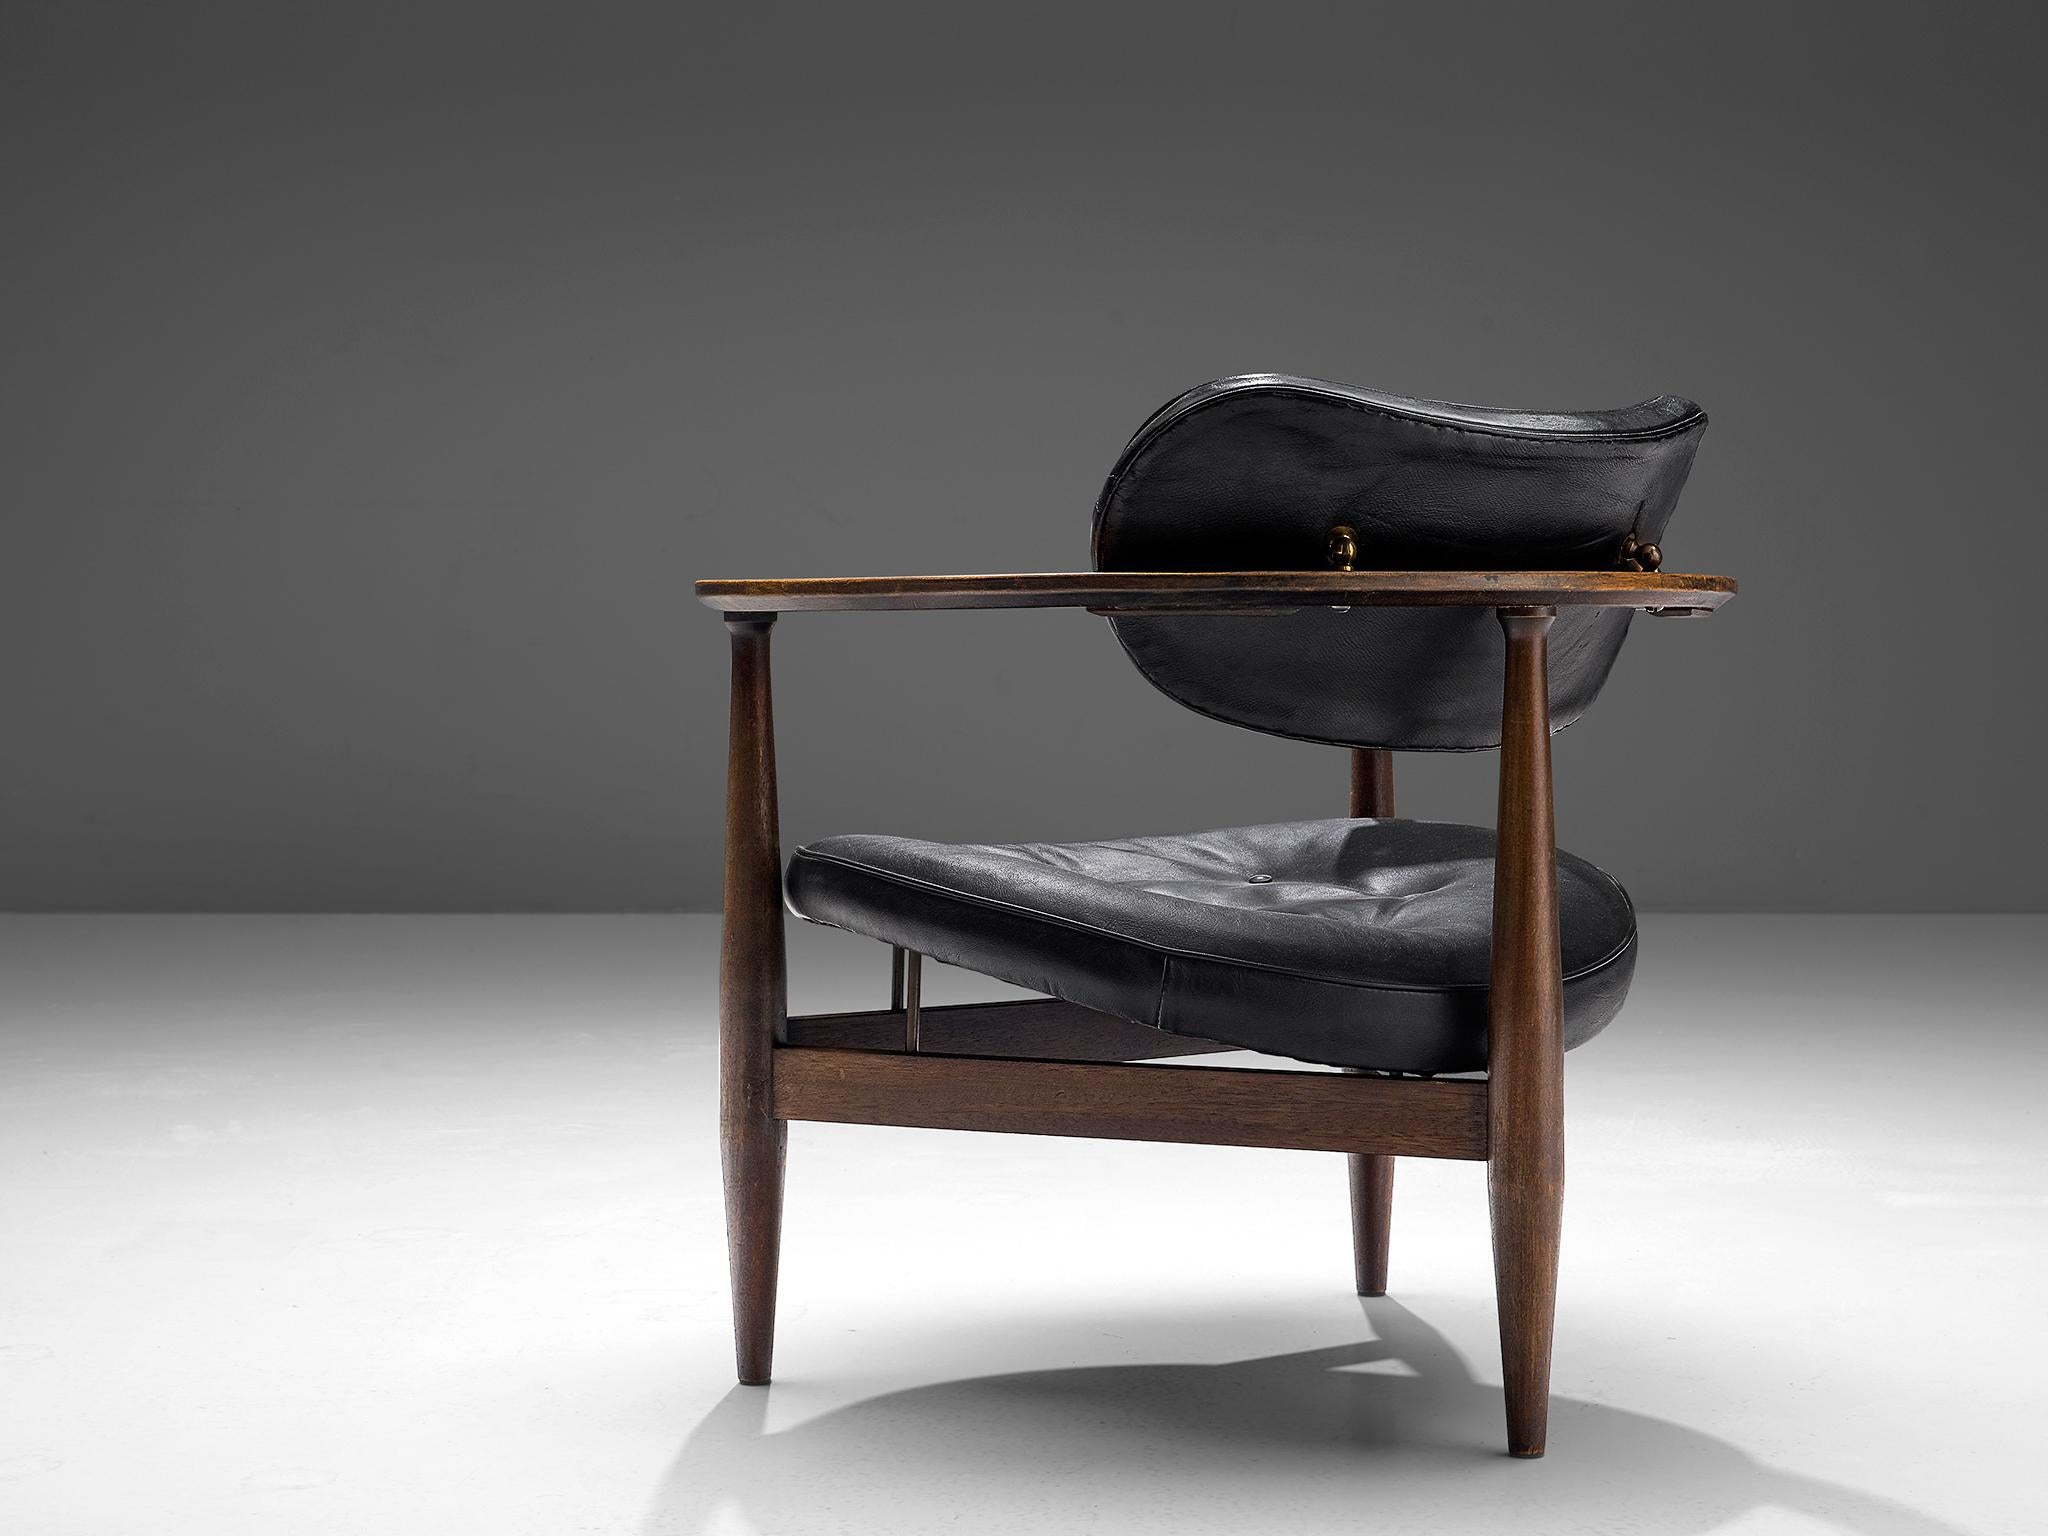 Dutch lounge chair, black leather, wood, the Netherlands, 1960s

This sculptural lounge chair has a butterfly shaped back and a round seat. The frame is softly shaped and holds elegant details such as the tiny wooden pins underneath the seat. Other